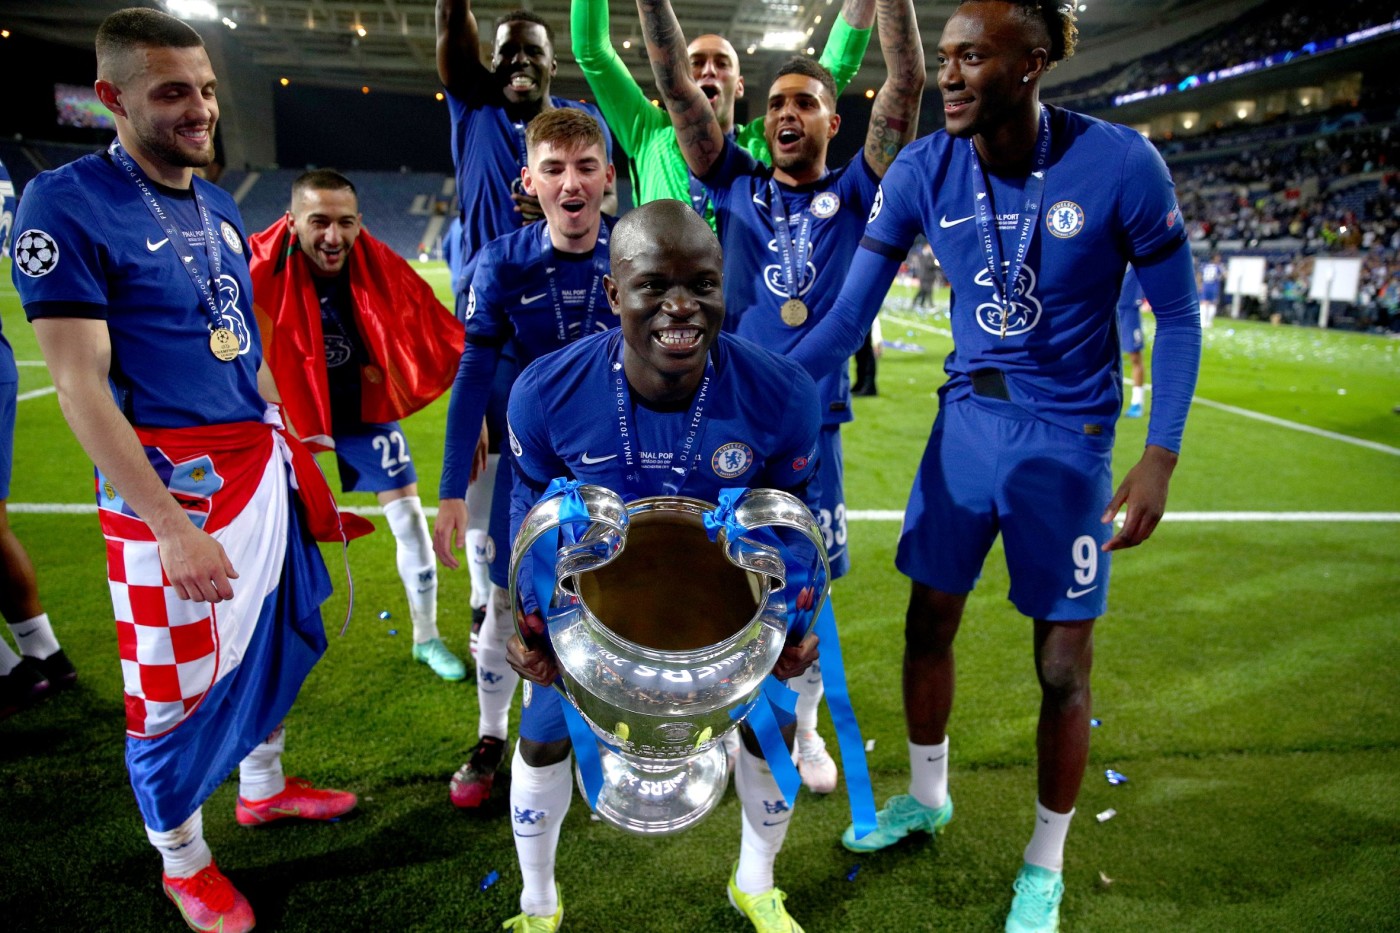 UEFA Champions League trophy goes on display to Chelsea supporters!, News, Official Site